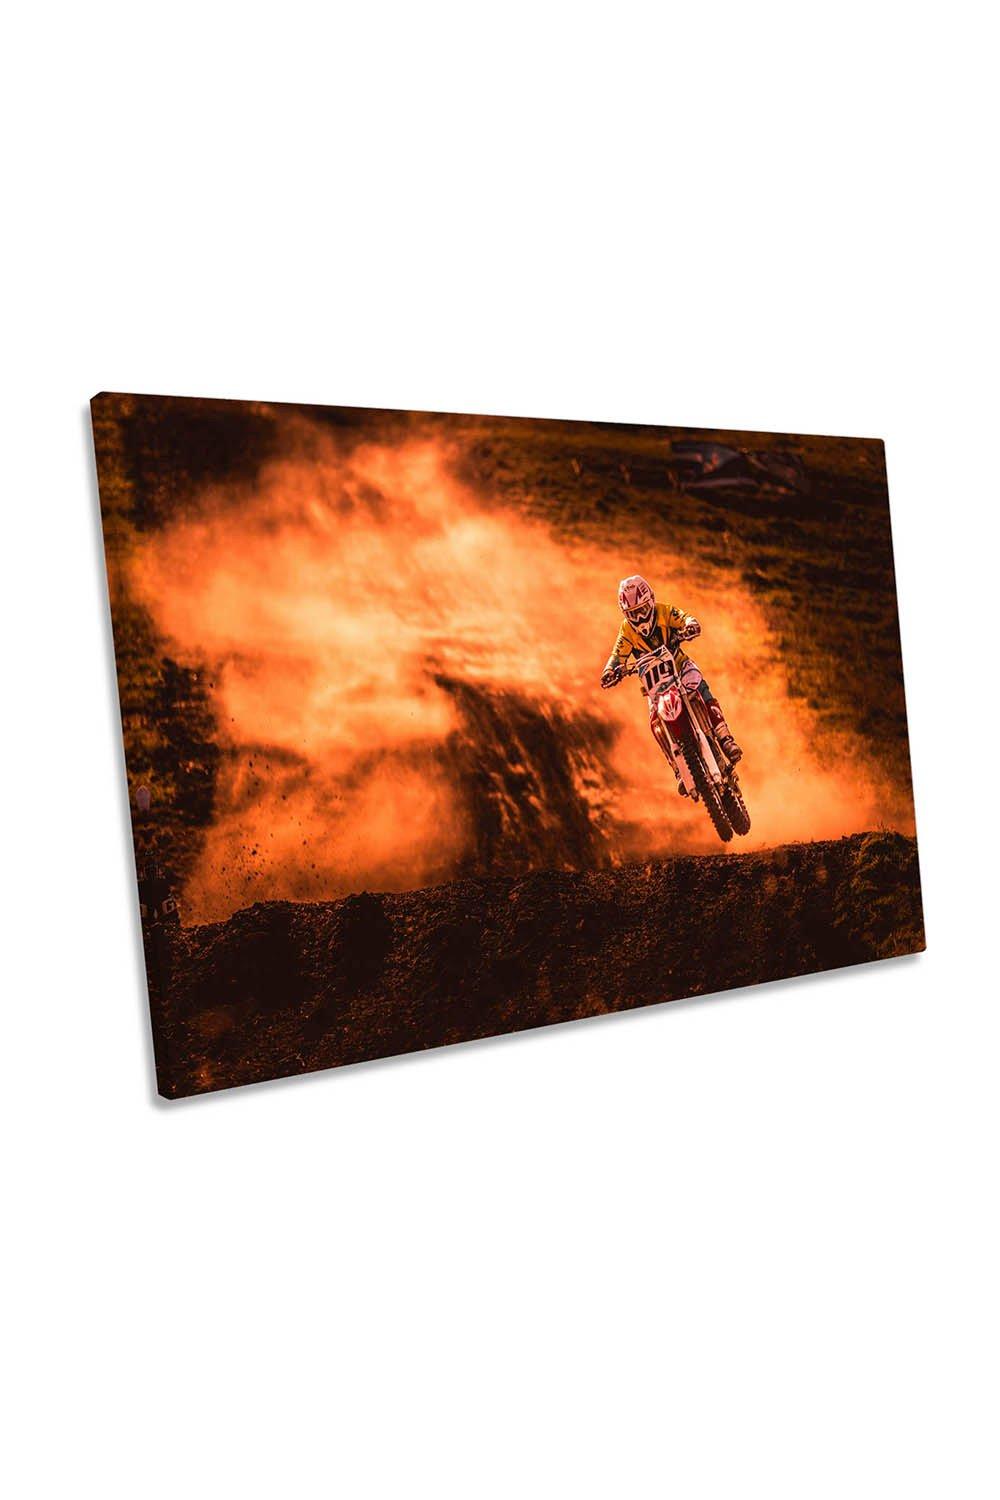 Motocross Extreme Sports Orange Canvas Wall Art Picture Print